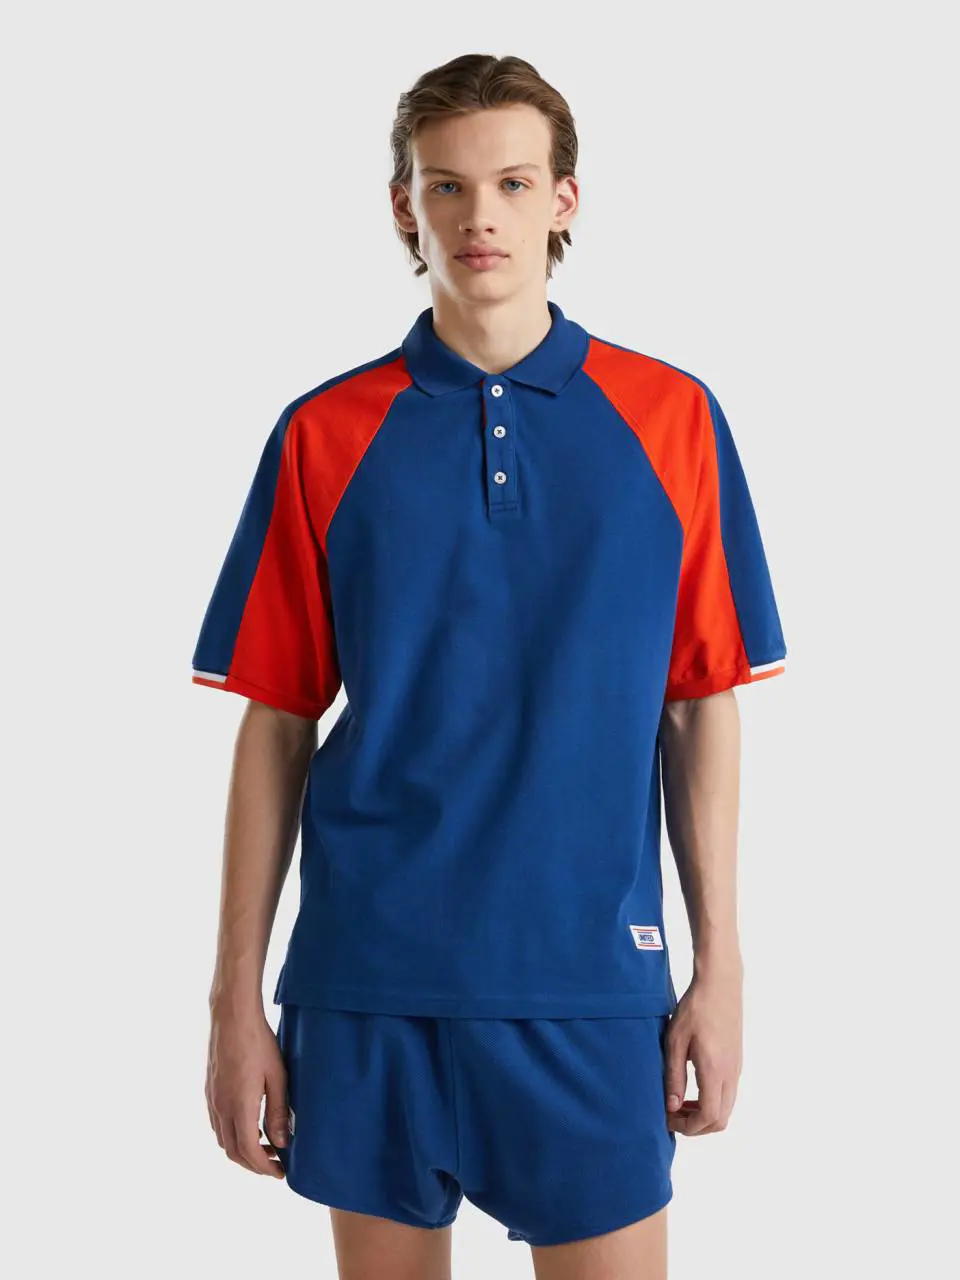 Benetton dark blue polo with red bands. 1